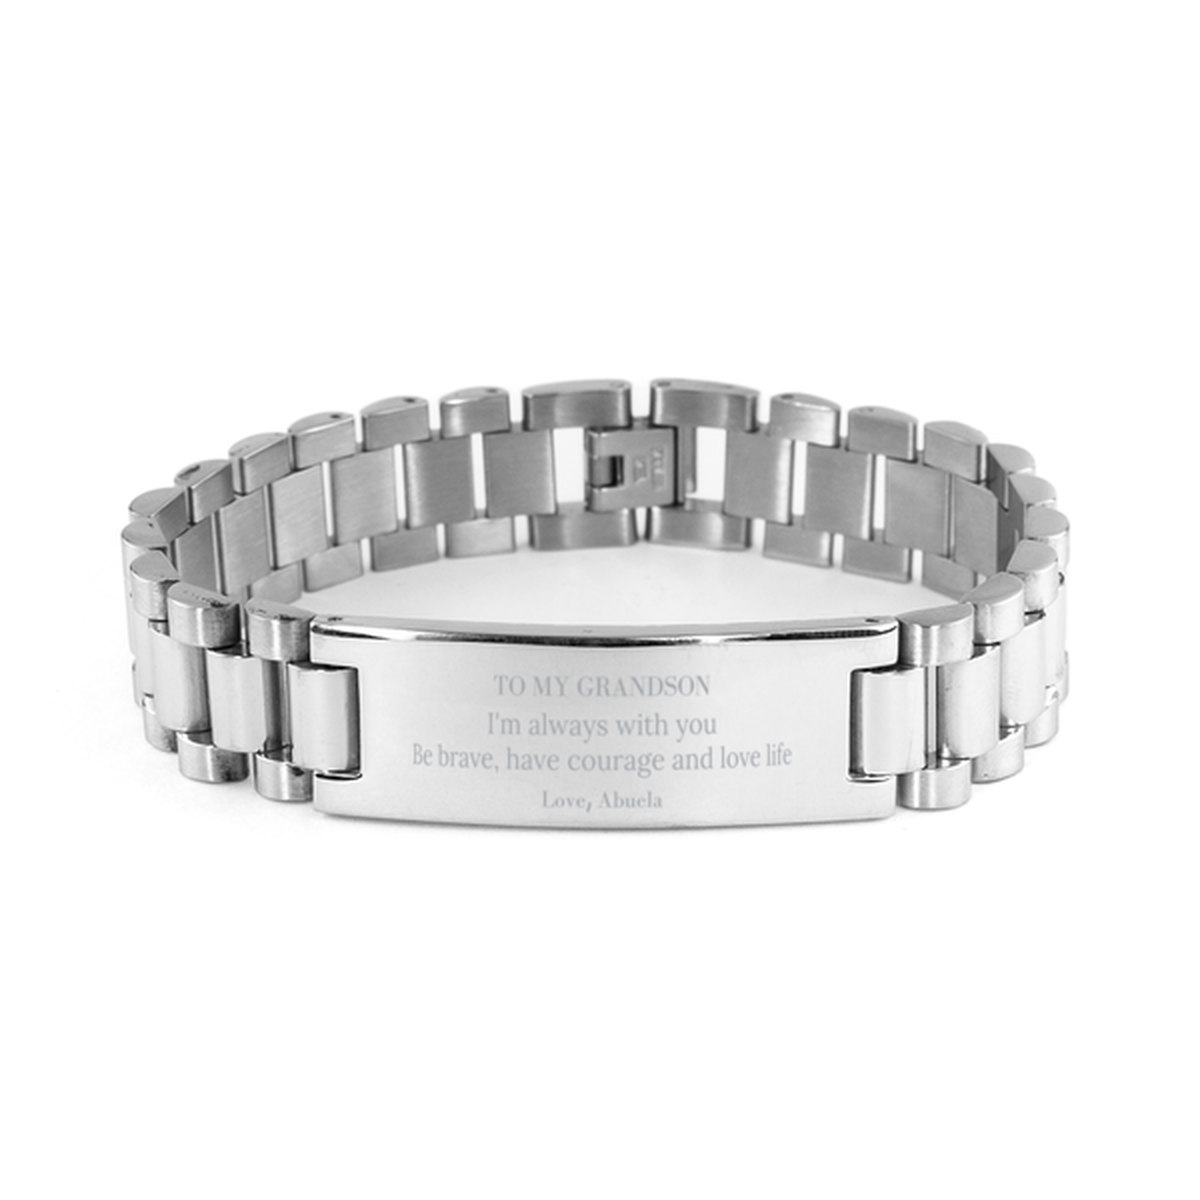 To My Grandson Gifts from Abuela, Unique Ladder Stainless Steel Bracelet Inspirational Christmas Birthday Graduation Gifts for Grandson I'm always with you. Be brave, have courage and love life. Love, Abuela